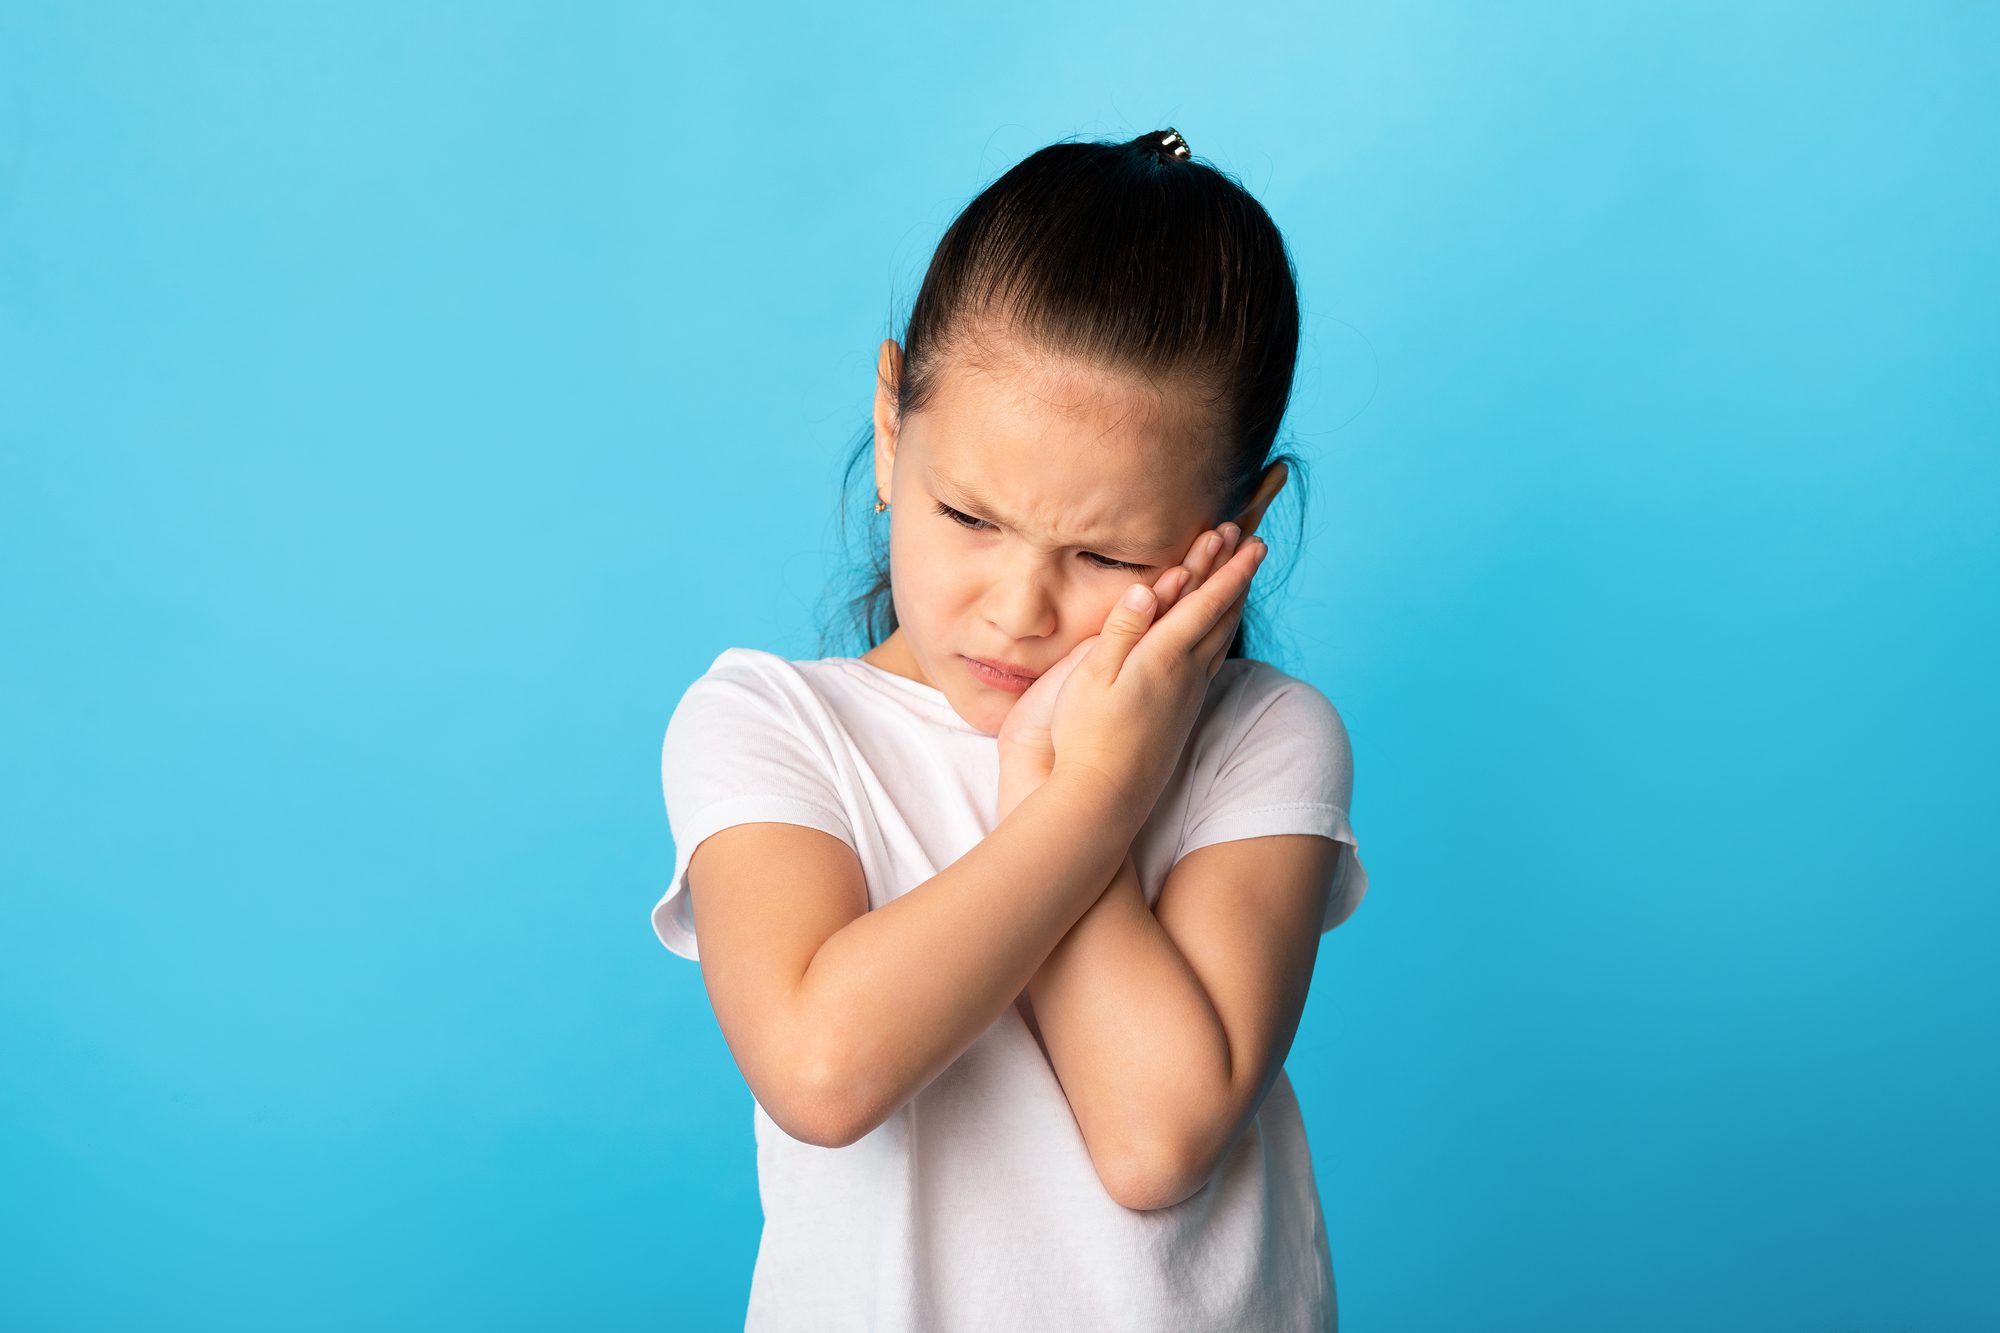 Unhappy girl suffering from toothache from cavity, touching cheek